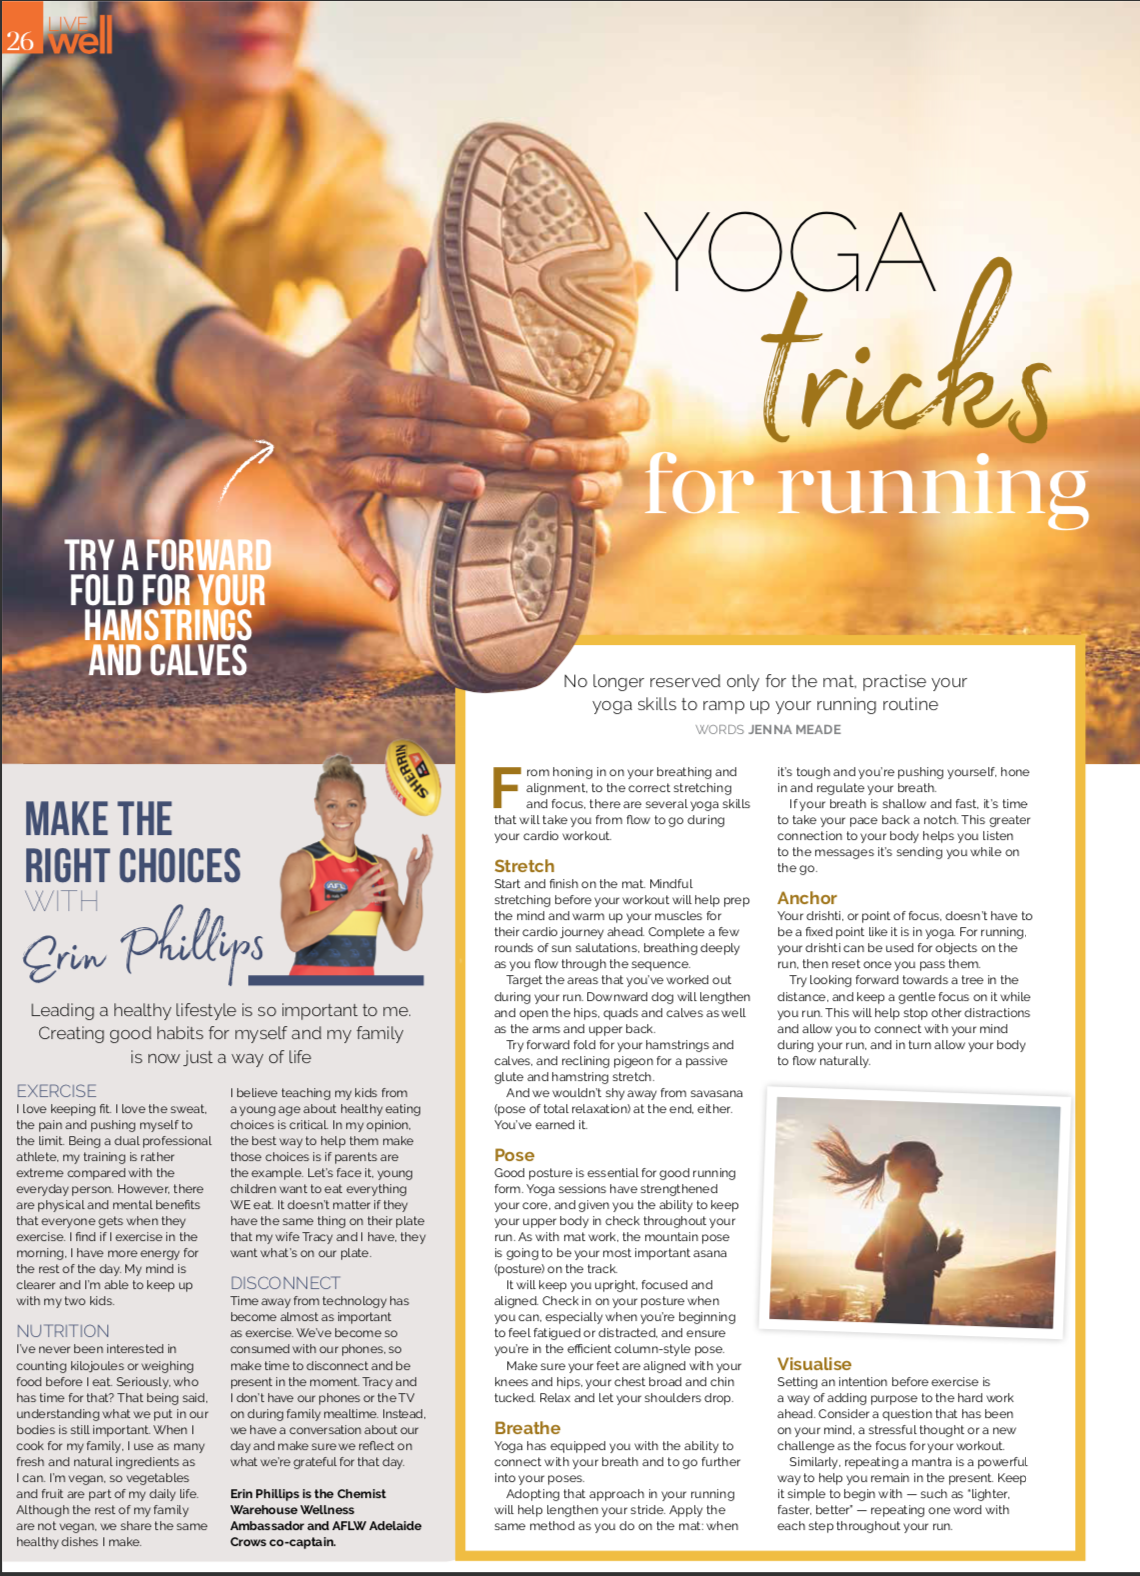 A photo of the feature, as published in House of Wellness